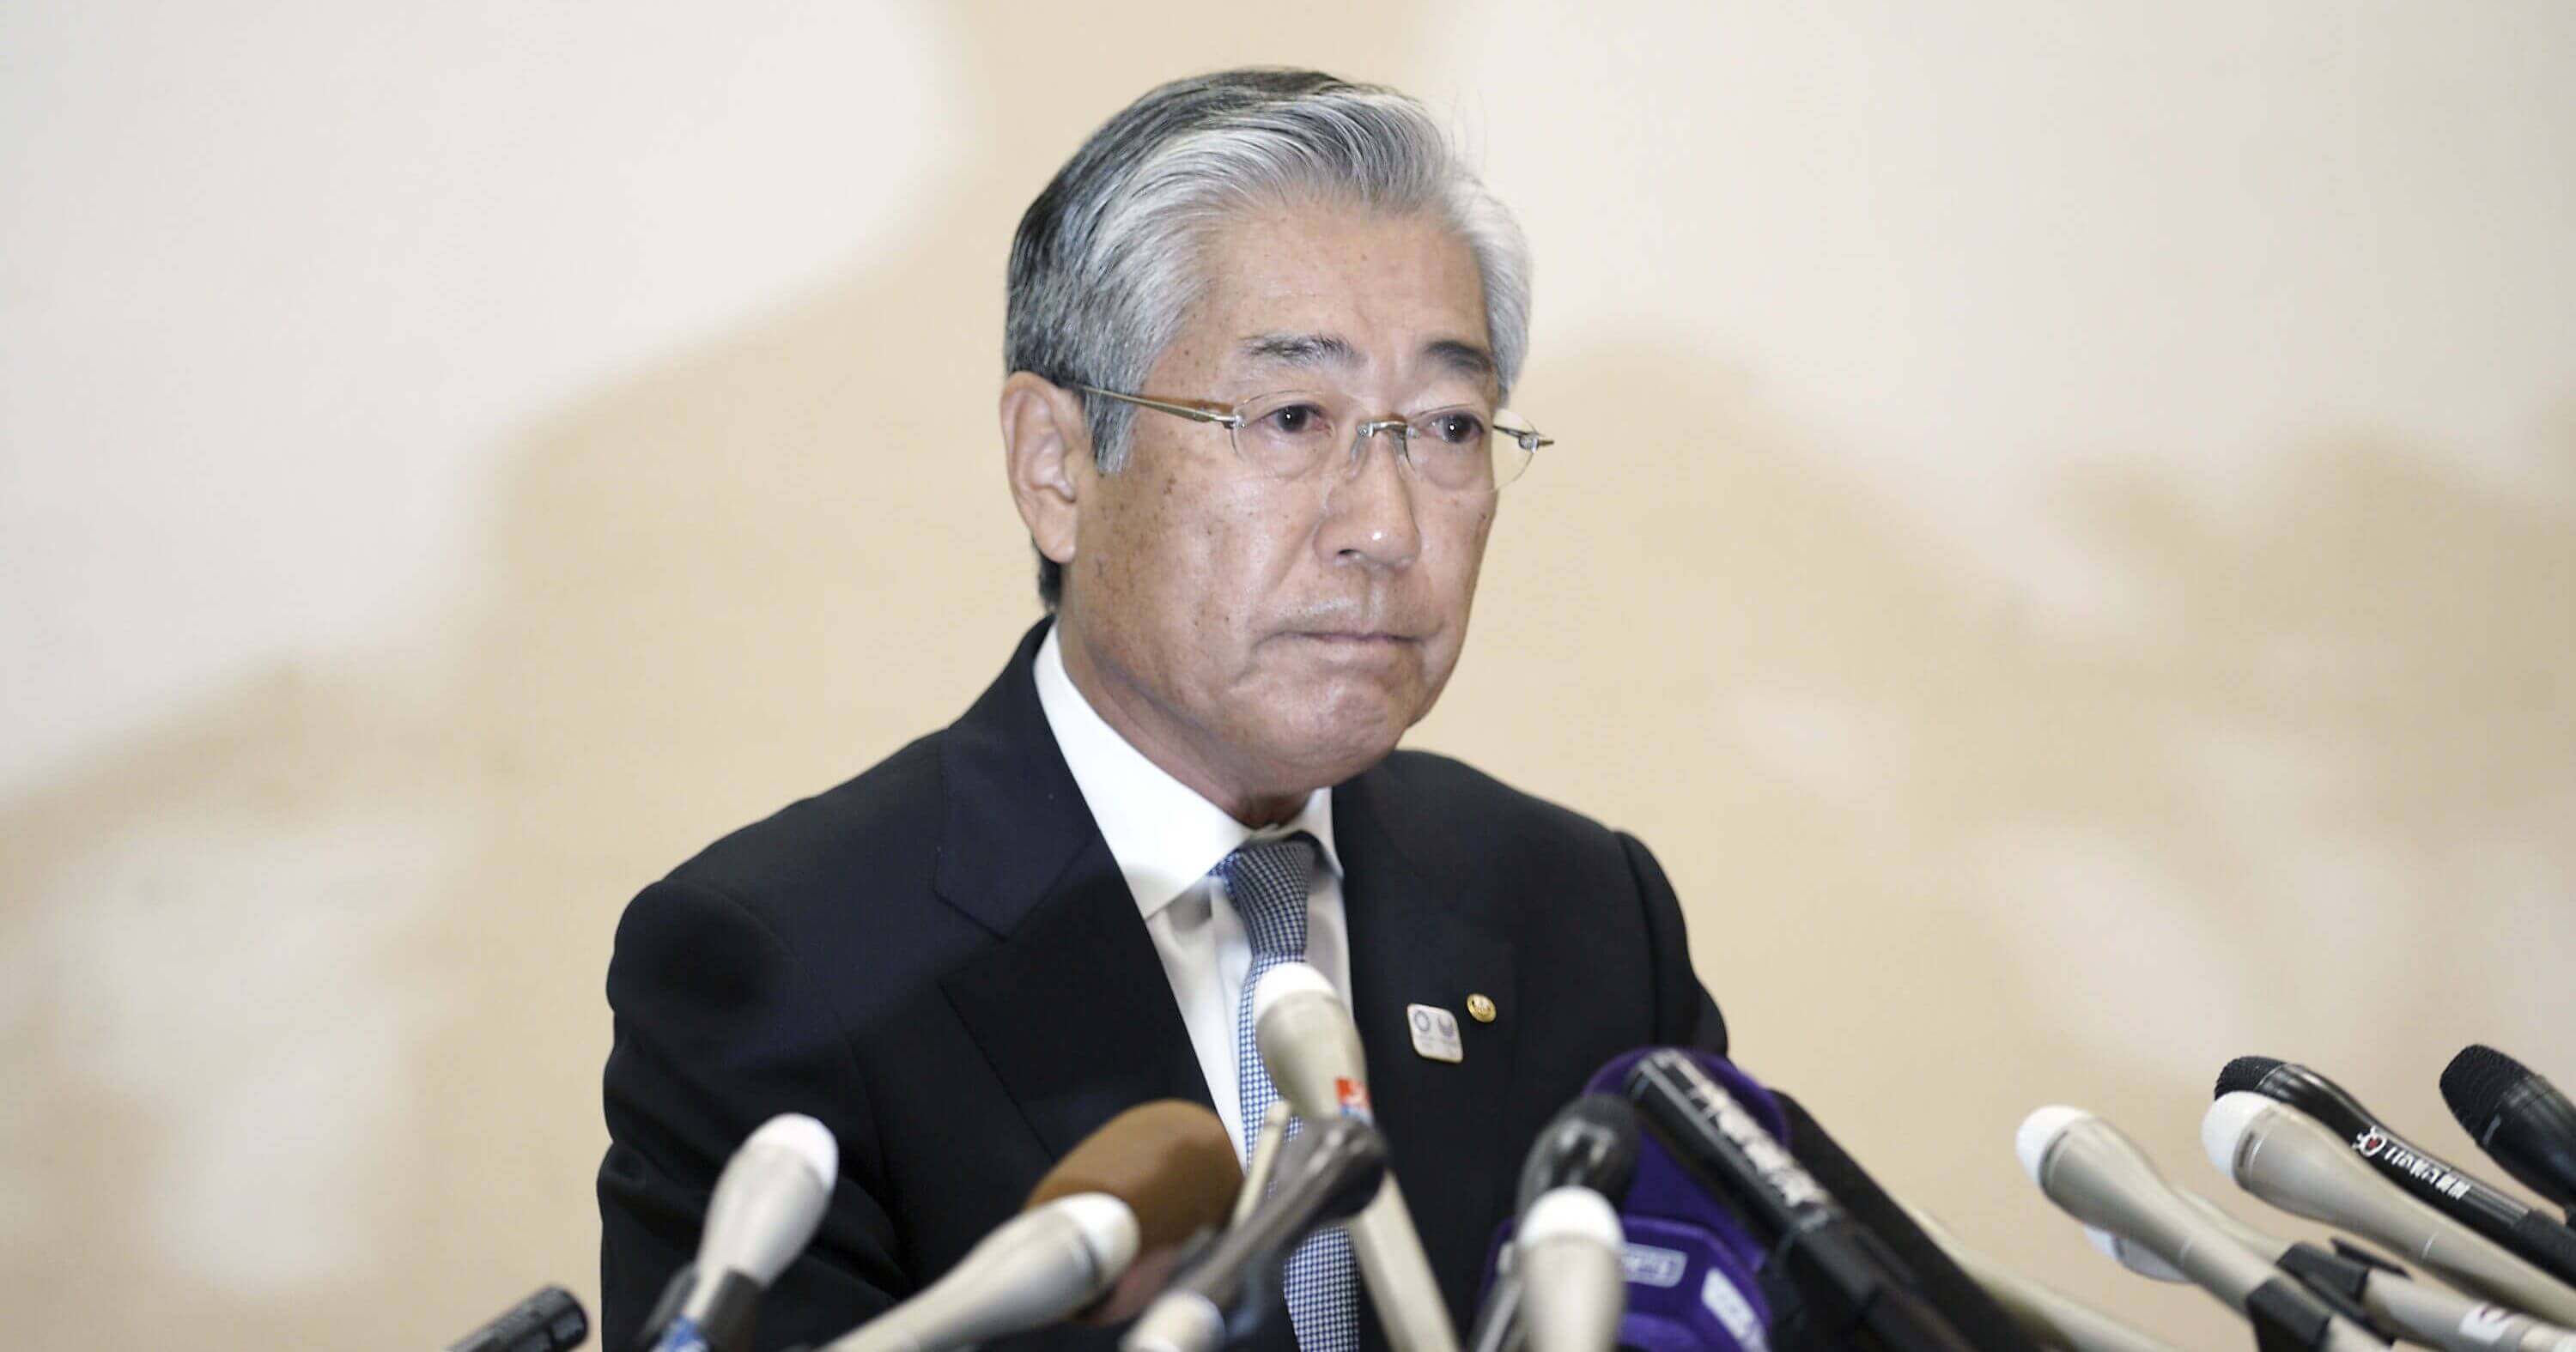 Tsunekazu Takeda, a member of the International Olympics Committee and head of the Japanese Olympic Committee, pauses during a press conference in Tokyo on Tuesday